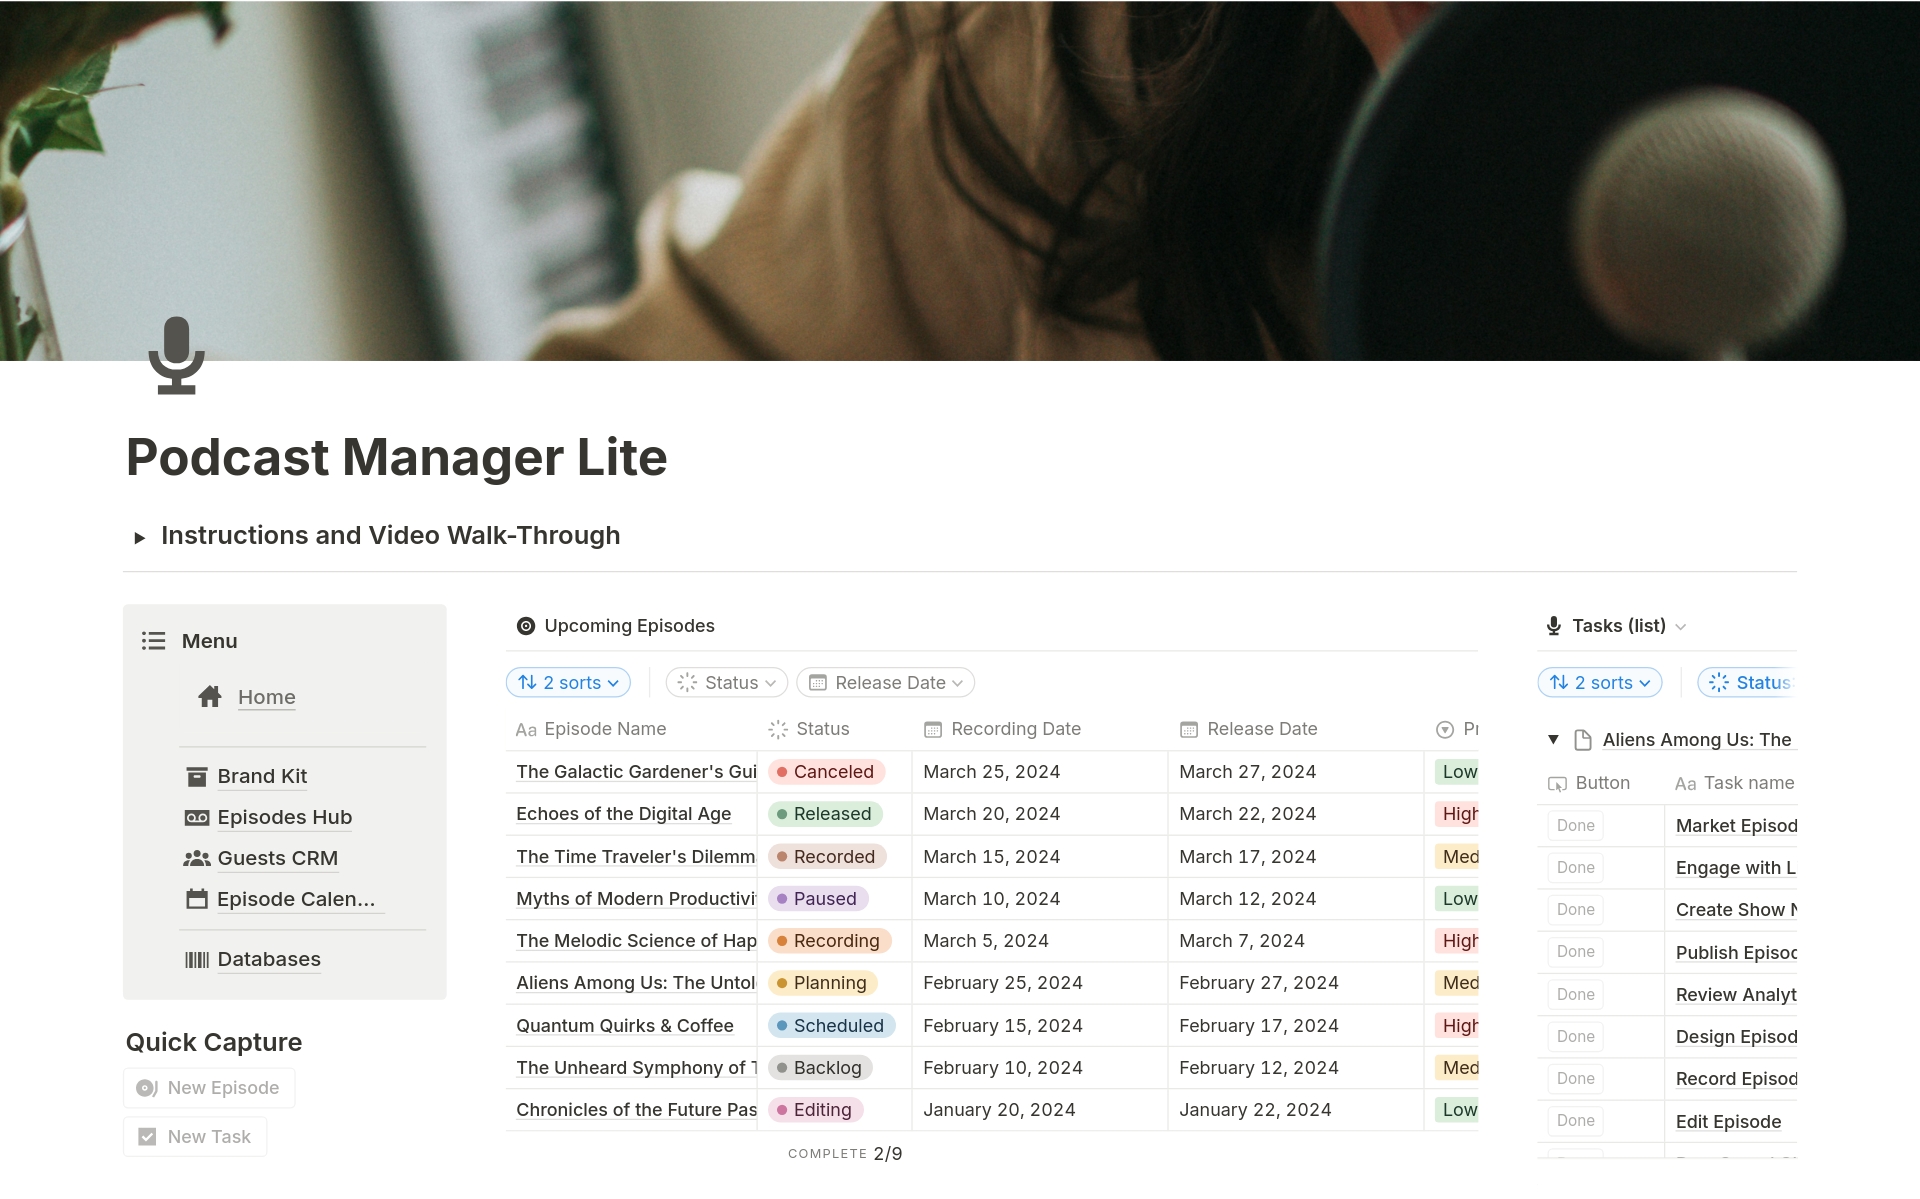 Are you looking for a smooth start into the world of Podcasting? This system is made for you! The Podcast Production Manager Lite includes all the necessary features to kickstart your podcast – Episode and Task Planning, Guest Management, Brand Kit and a handy Episode Calendar!